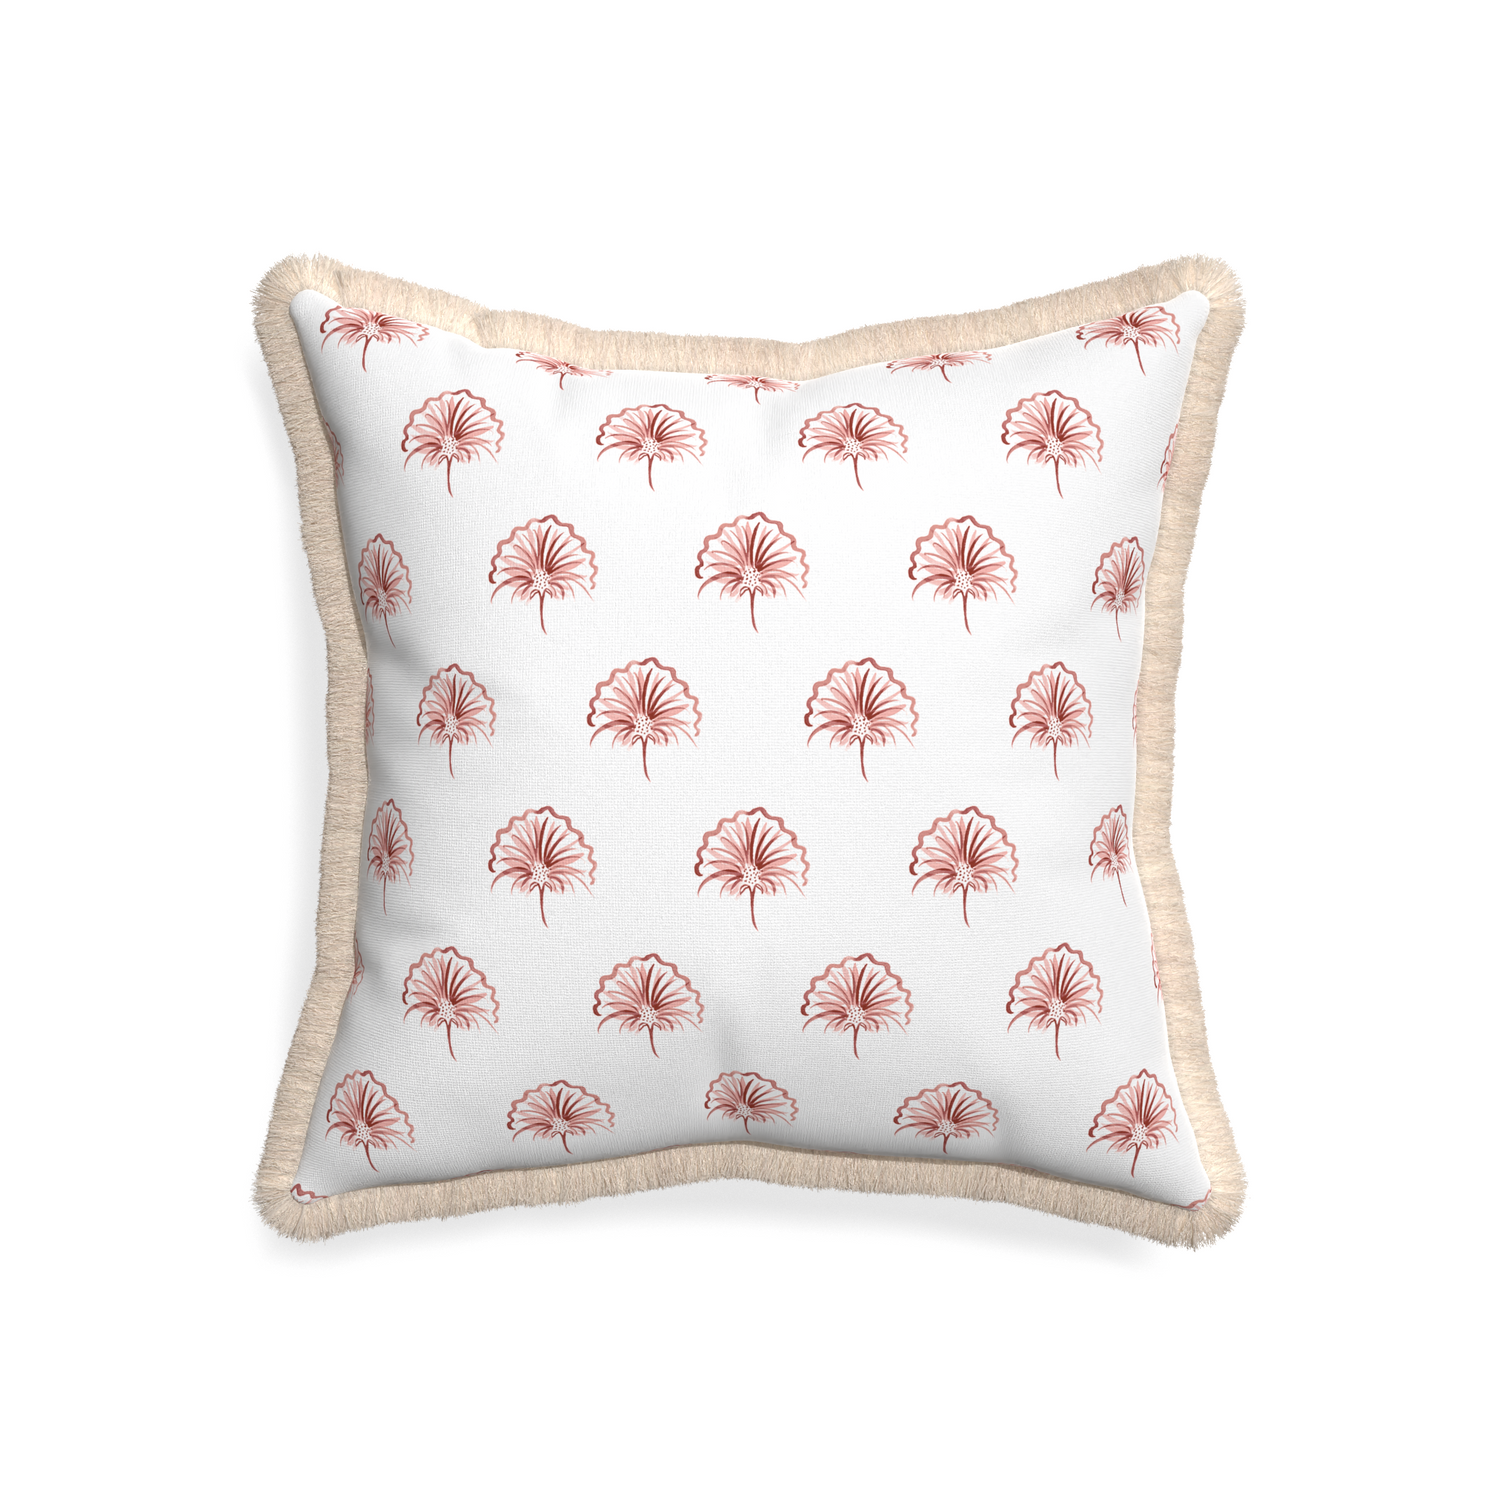 20-square penelope rose custom floral pinkpillow with cream fringe on white background